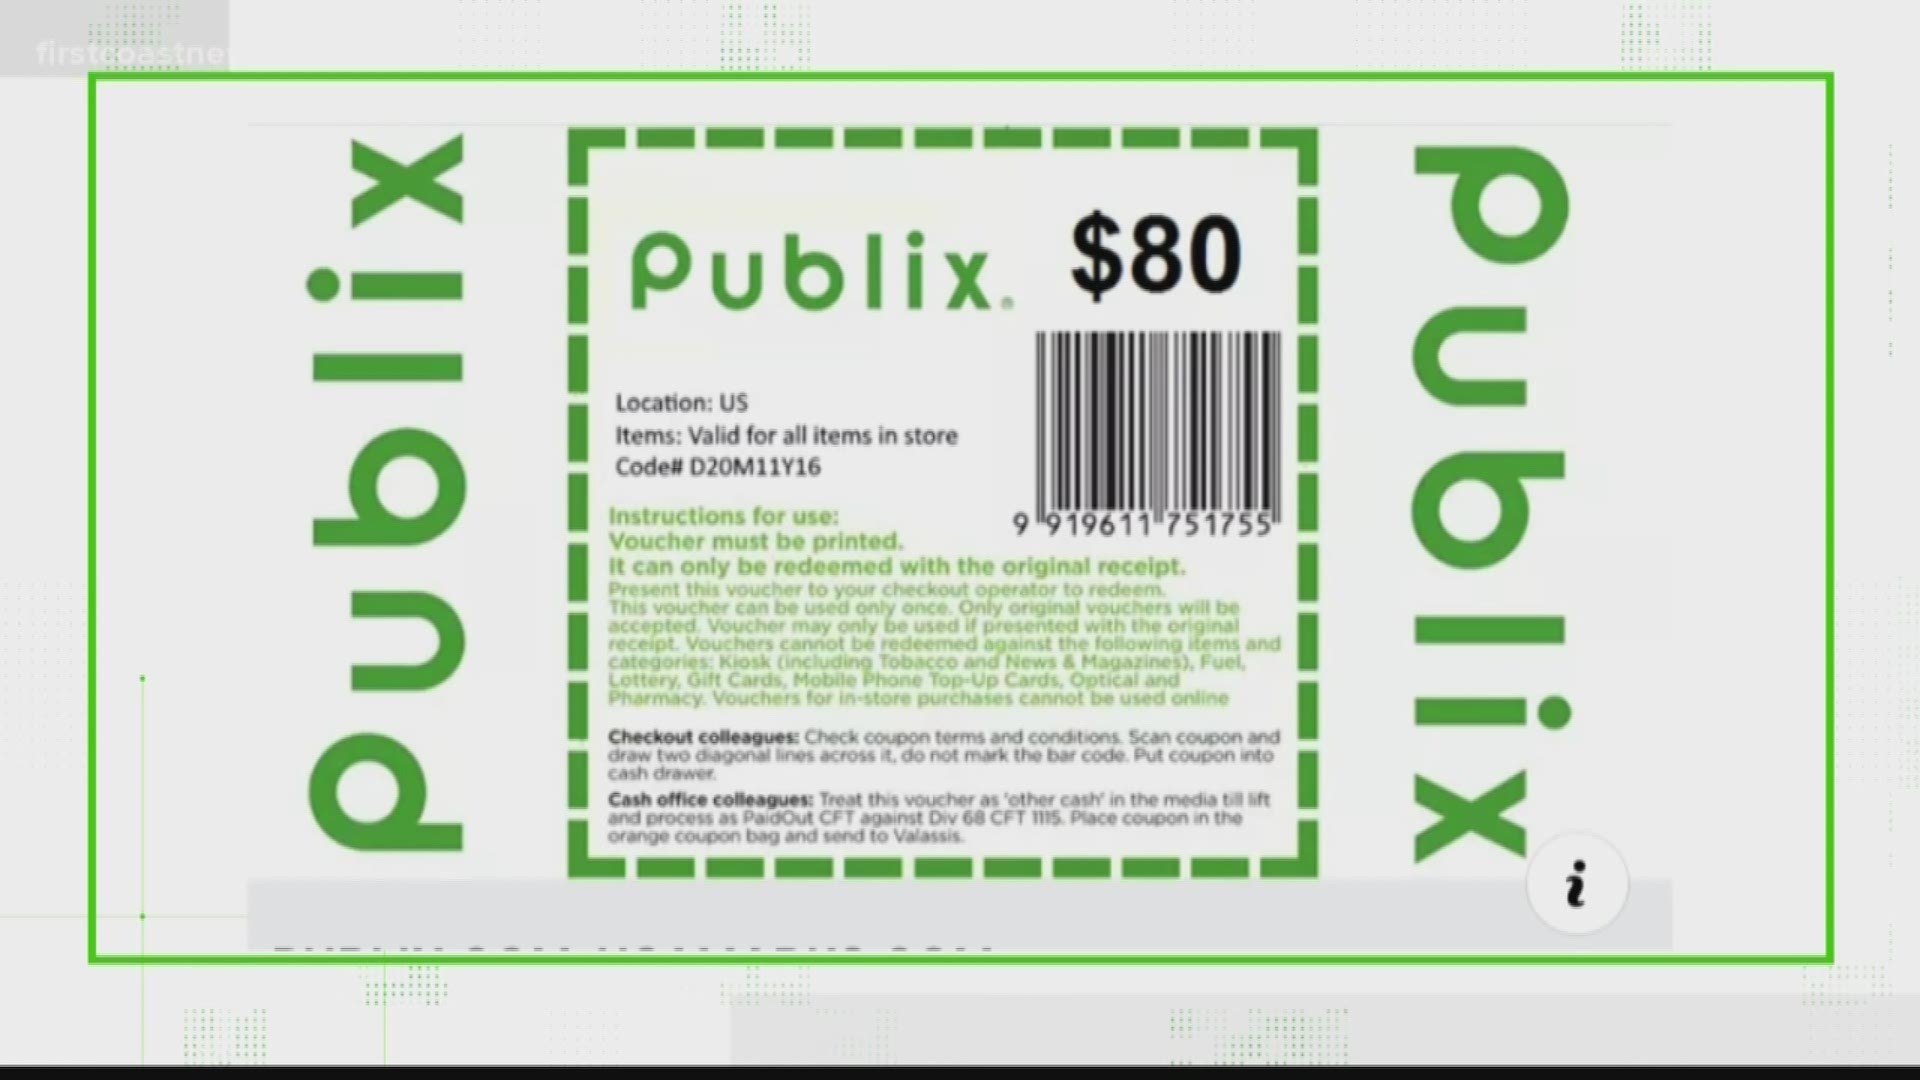 Sorry, shoppers. A Publix coupon circulating on Facebook appears too good to be true because it is.